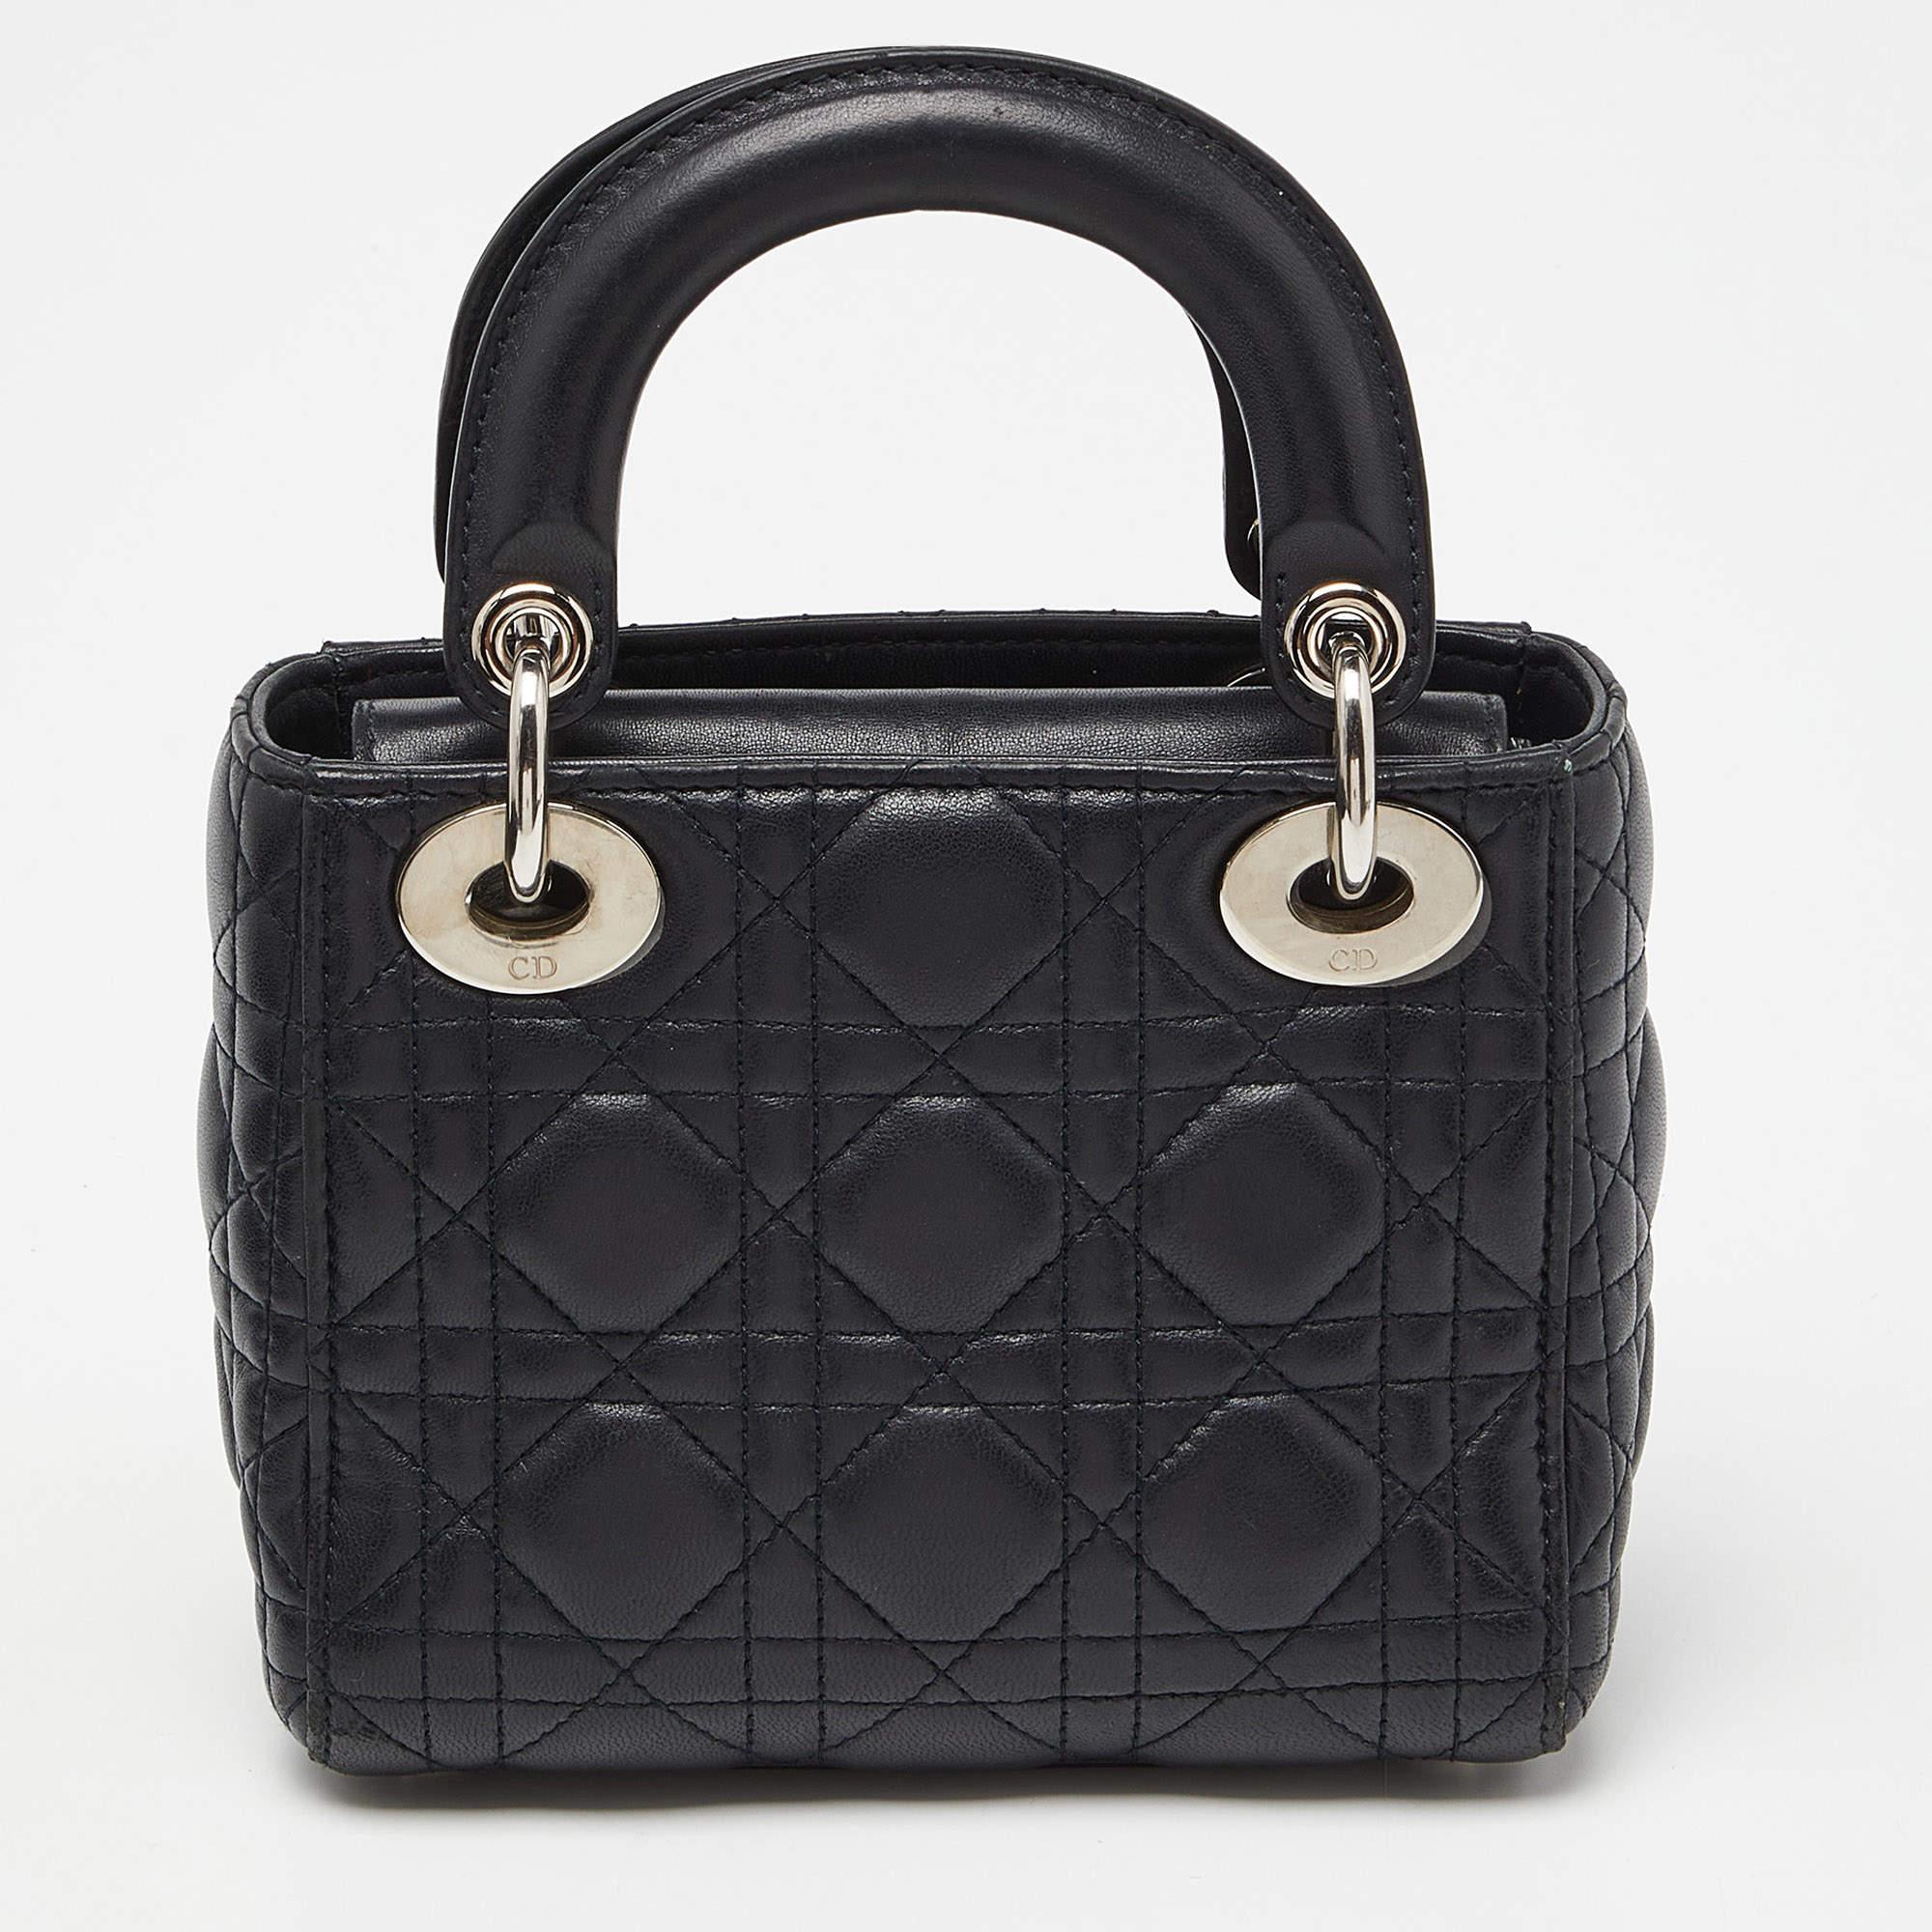 A timeless status and great design mark the Lady Dior tote. It is an iconic bag that people continue to invest in to this day. We have here this classic beauty crafted from Cannage leather. This mini Lady Dior is complete with two top handles, a